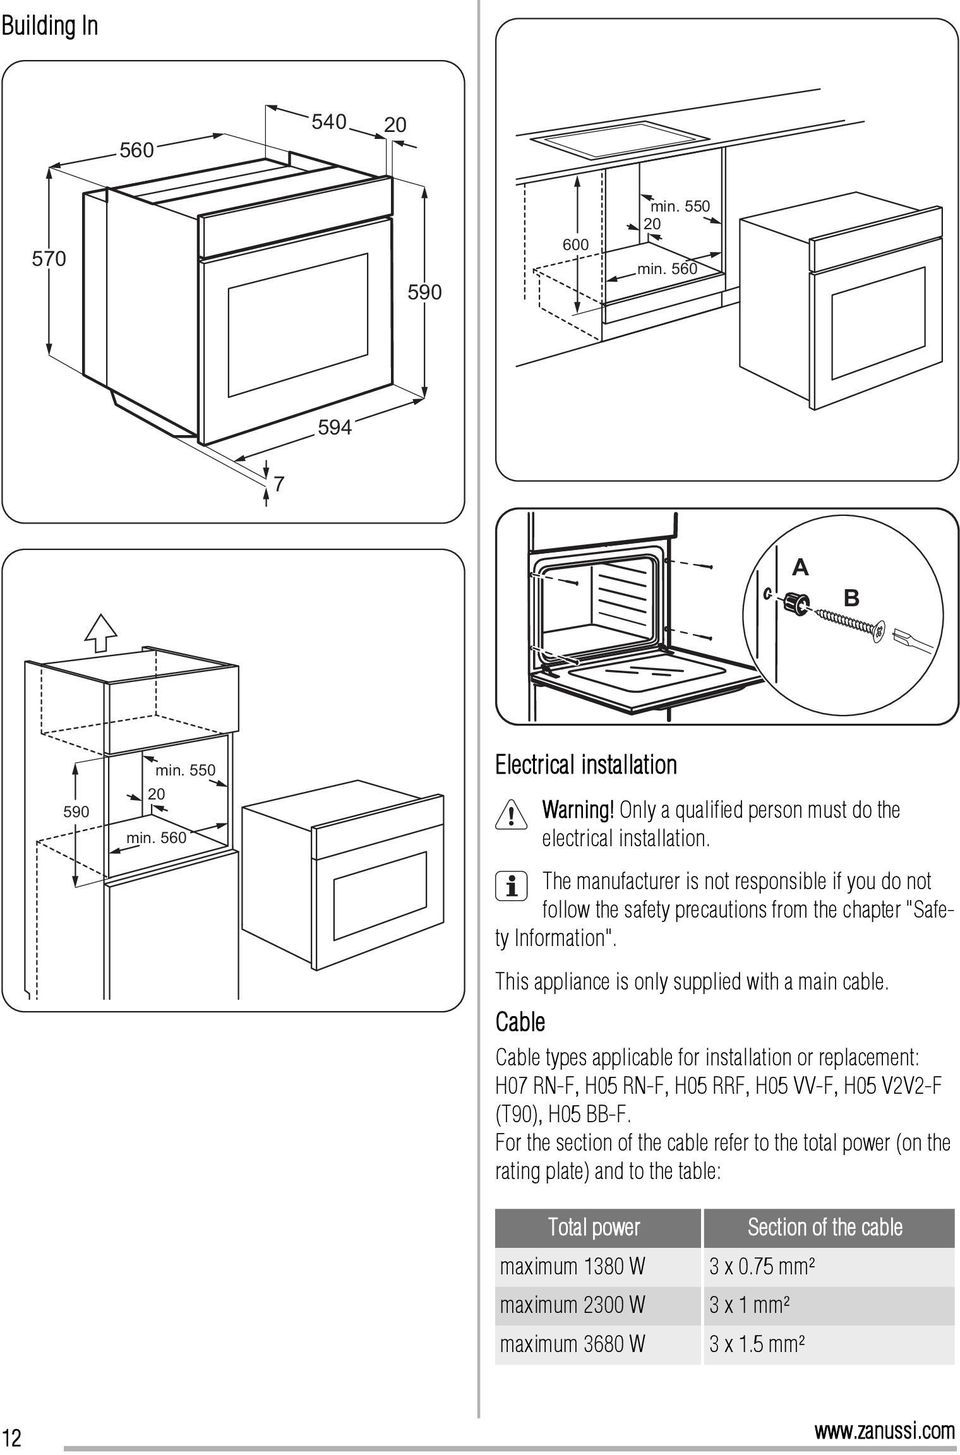 The manufacturer is not responsible if you do not follow the safety precautions from the chapter "Safety Information". This appliance is only supplied with a main cable.